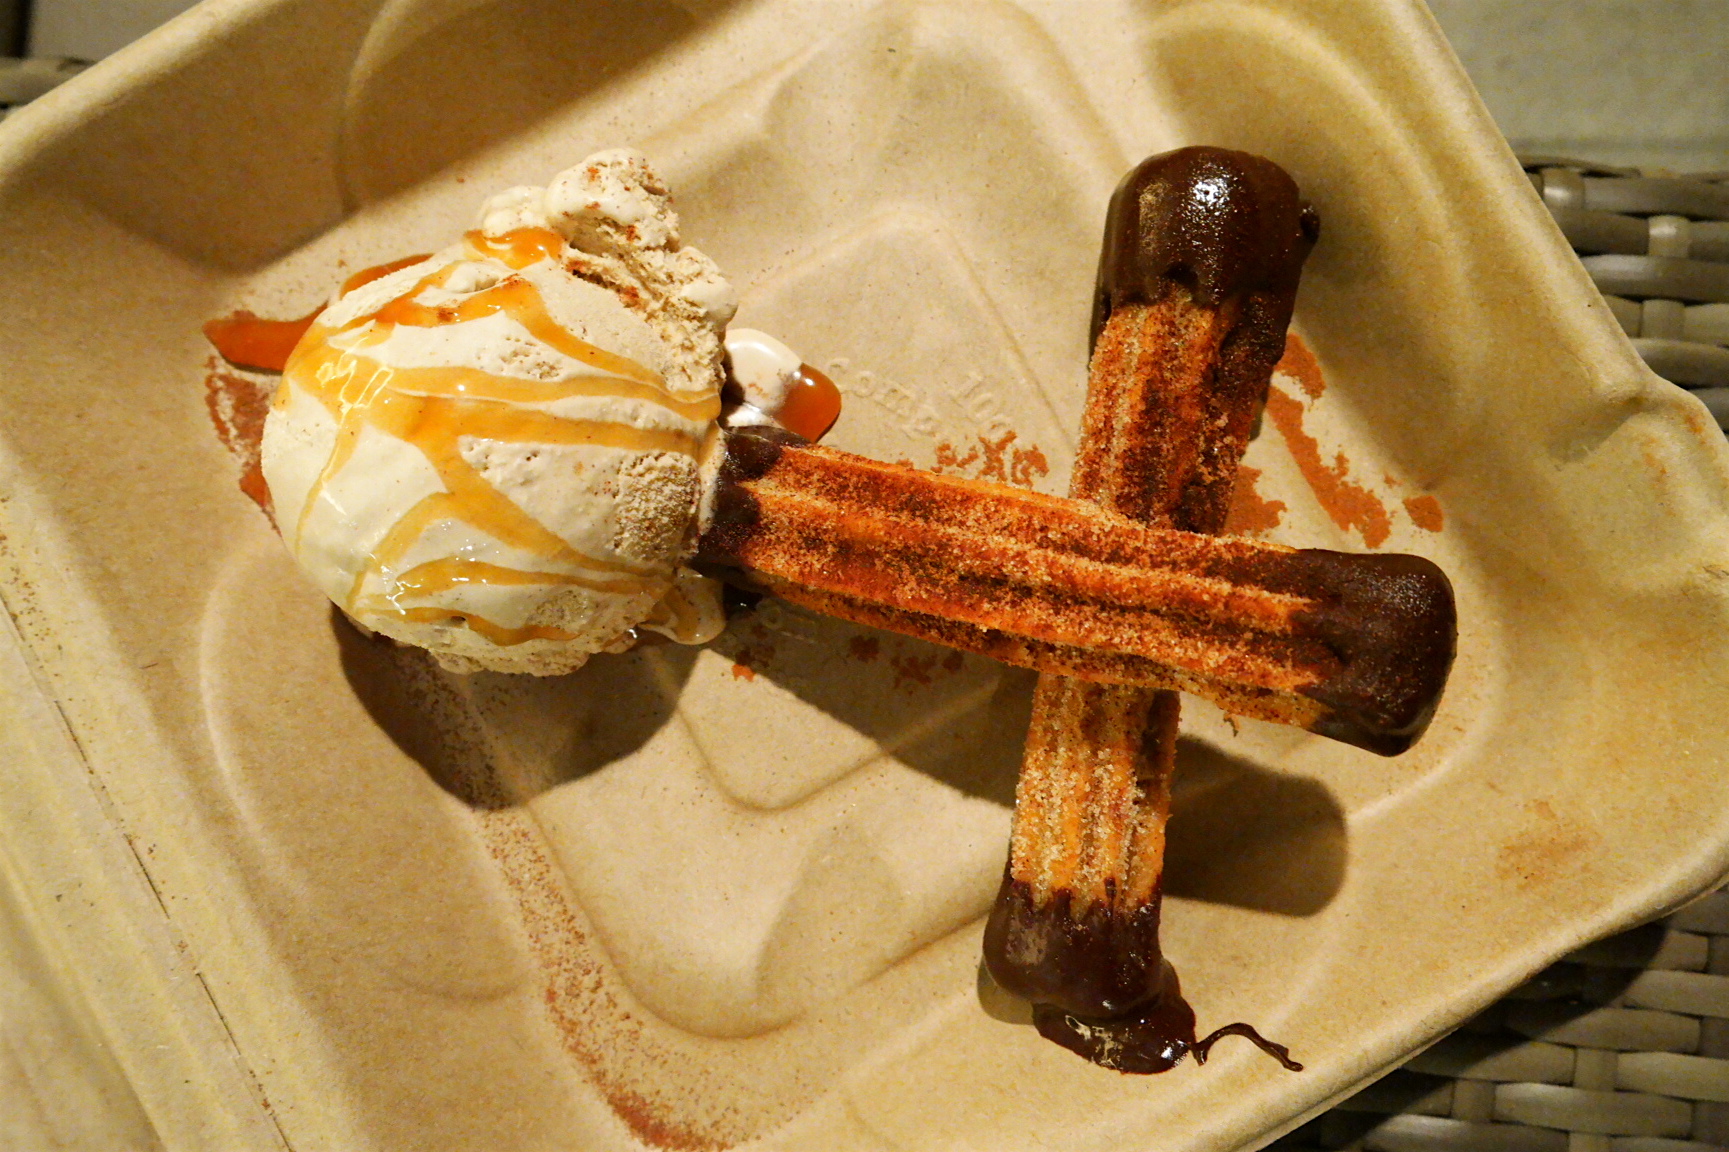 Chocolate Dipped Churros with Dulce de Leche Ice Cream